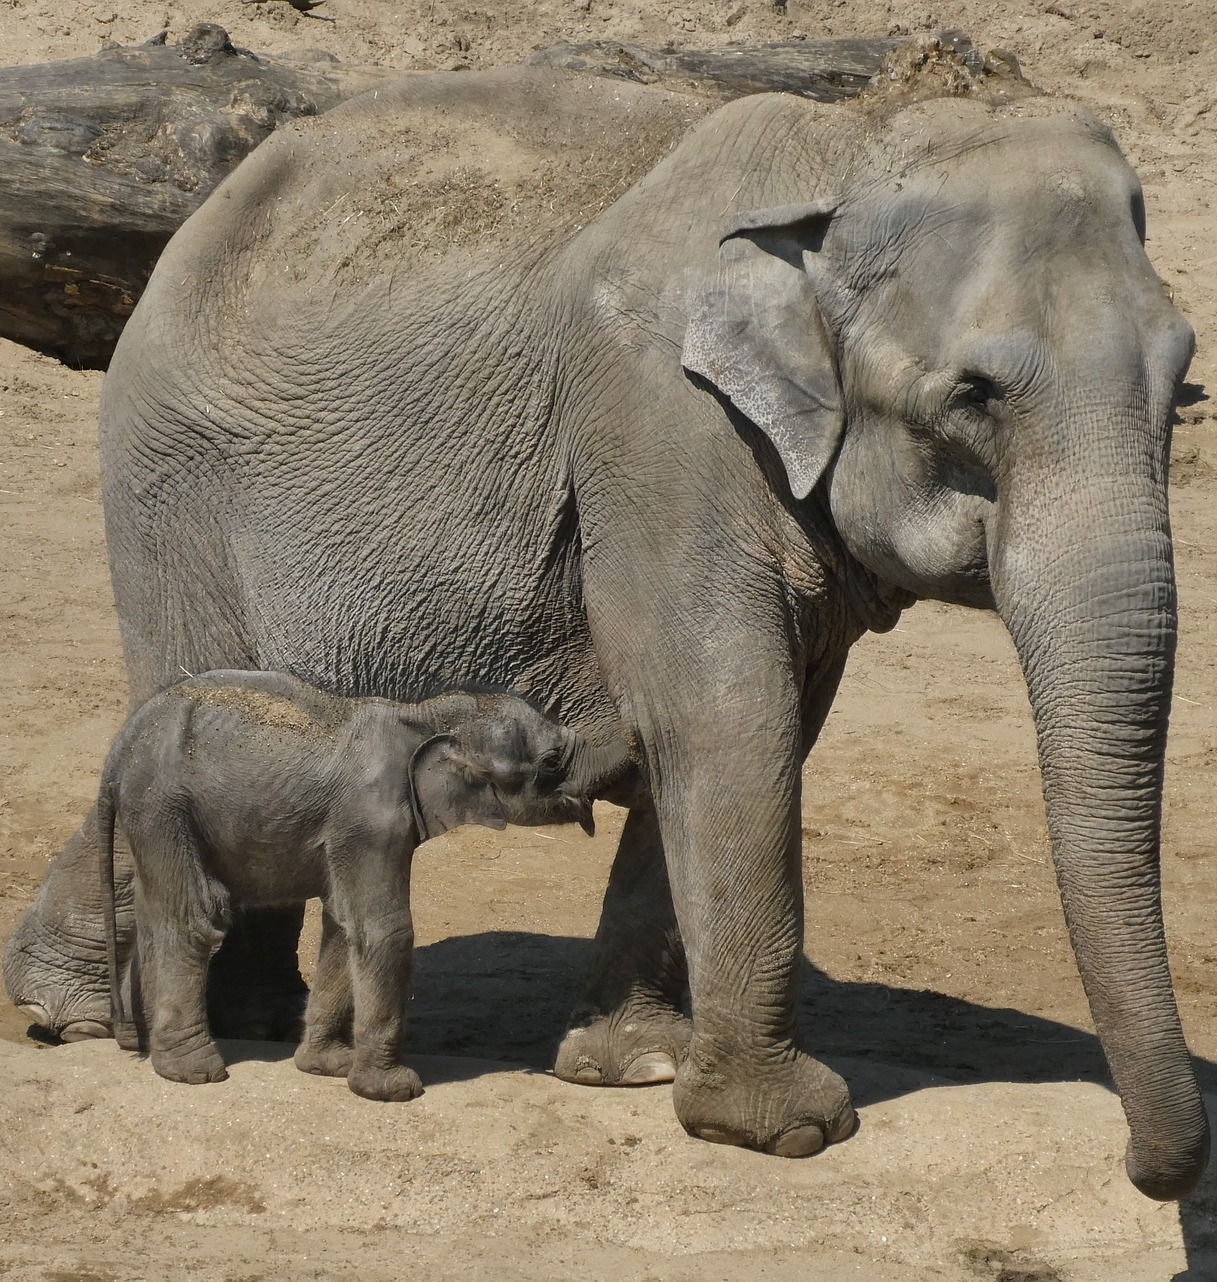 Picture of an elephant with her baby.